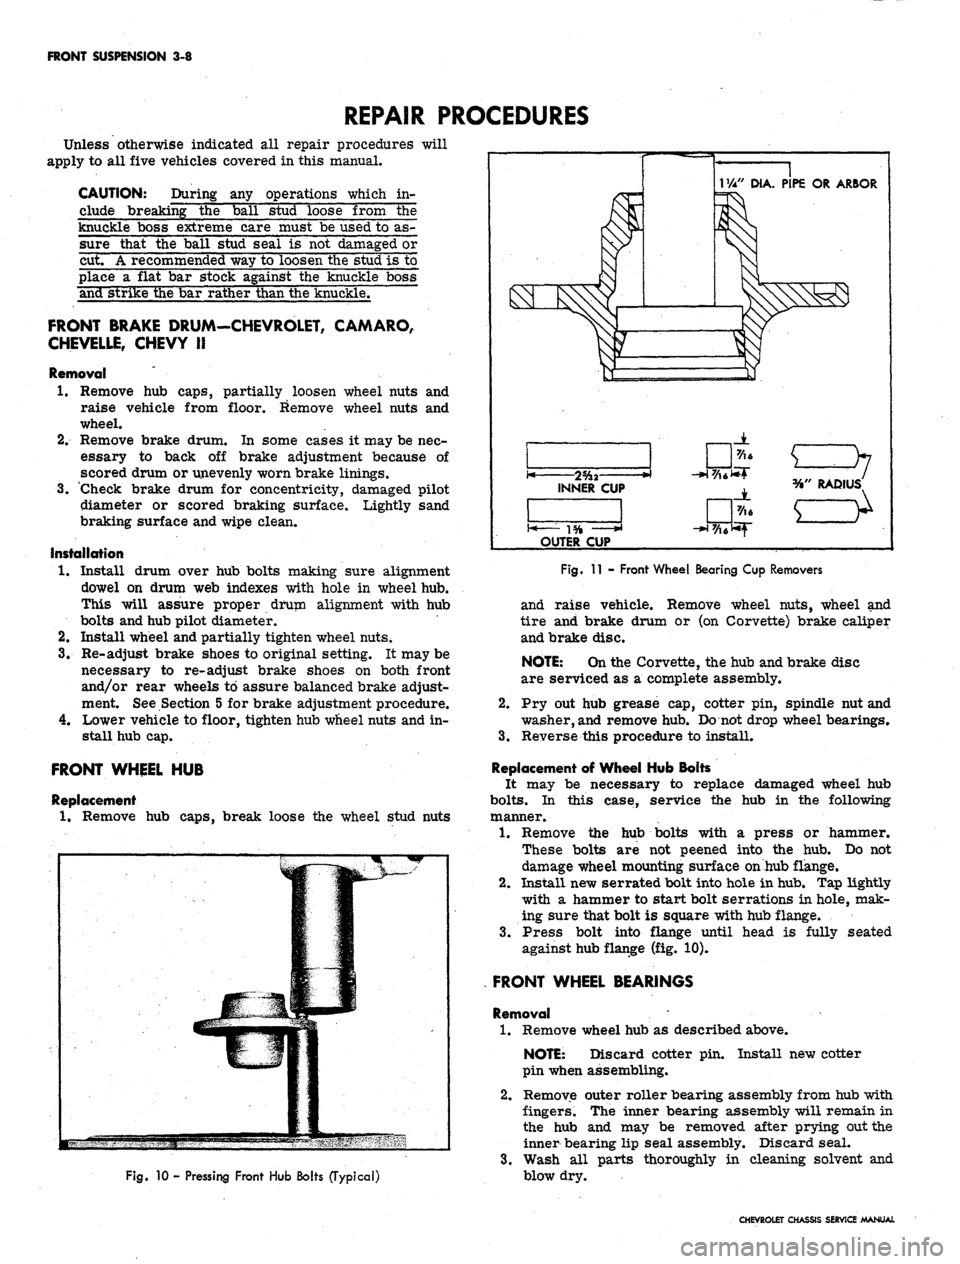 CHEVROLET CAMARO 1967 1.G Chassis User Guide 
FRONT SUSPENSION 3-8

REPAIR PROCEDURES

Unless otherwise indicated all repair procedures will

apply to all five vehicles covered in this manual.

CAUTION: During any operations which in-

clude bre